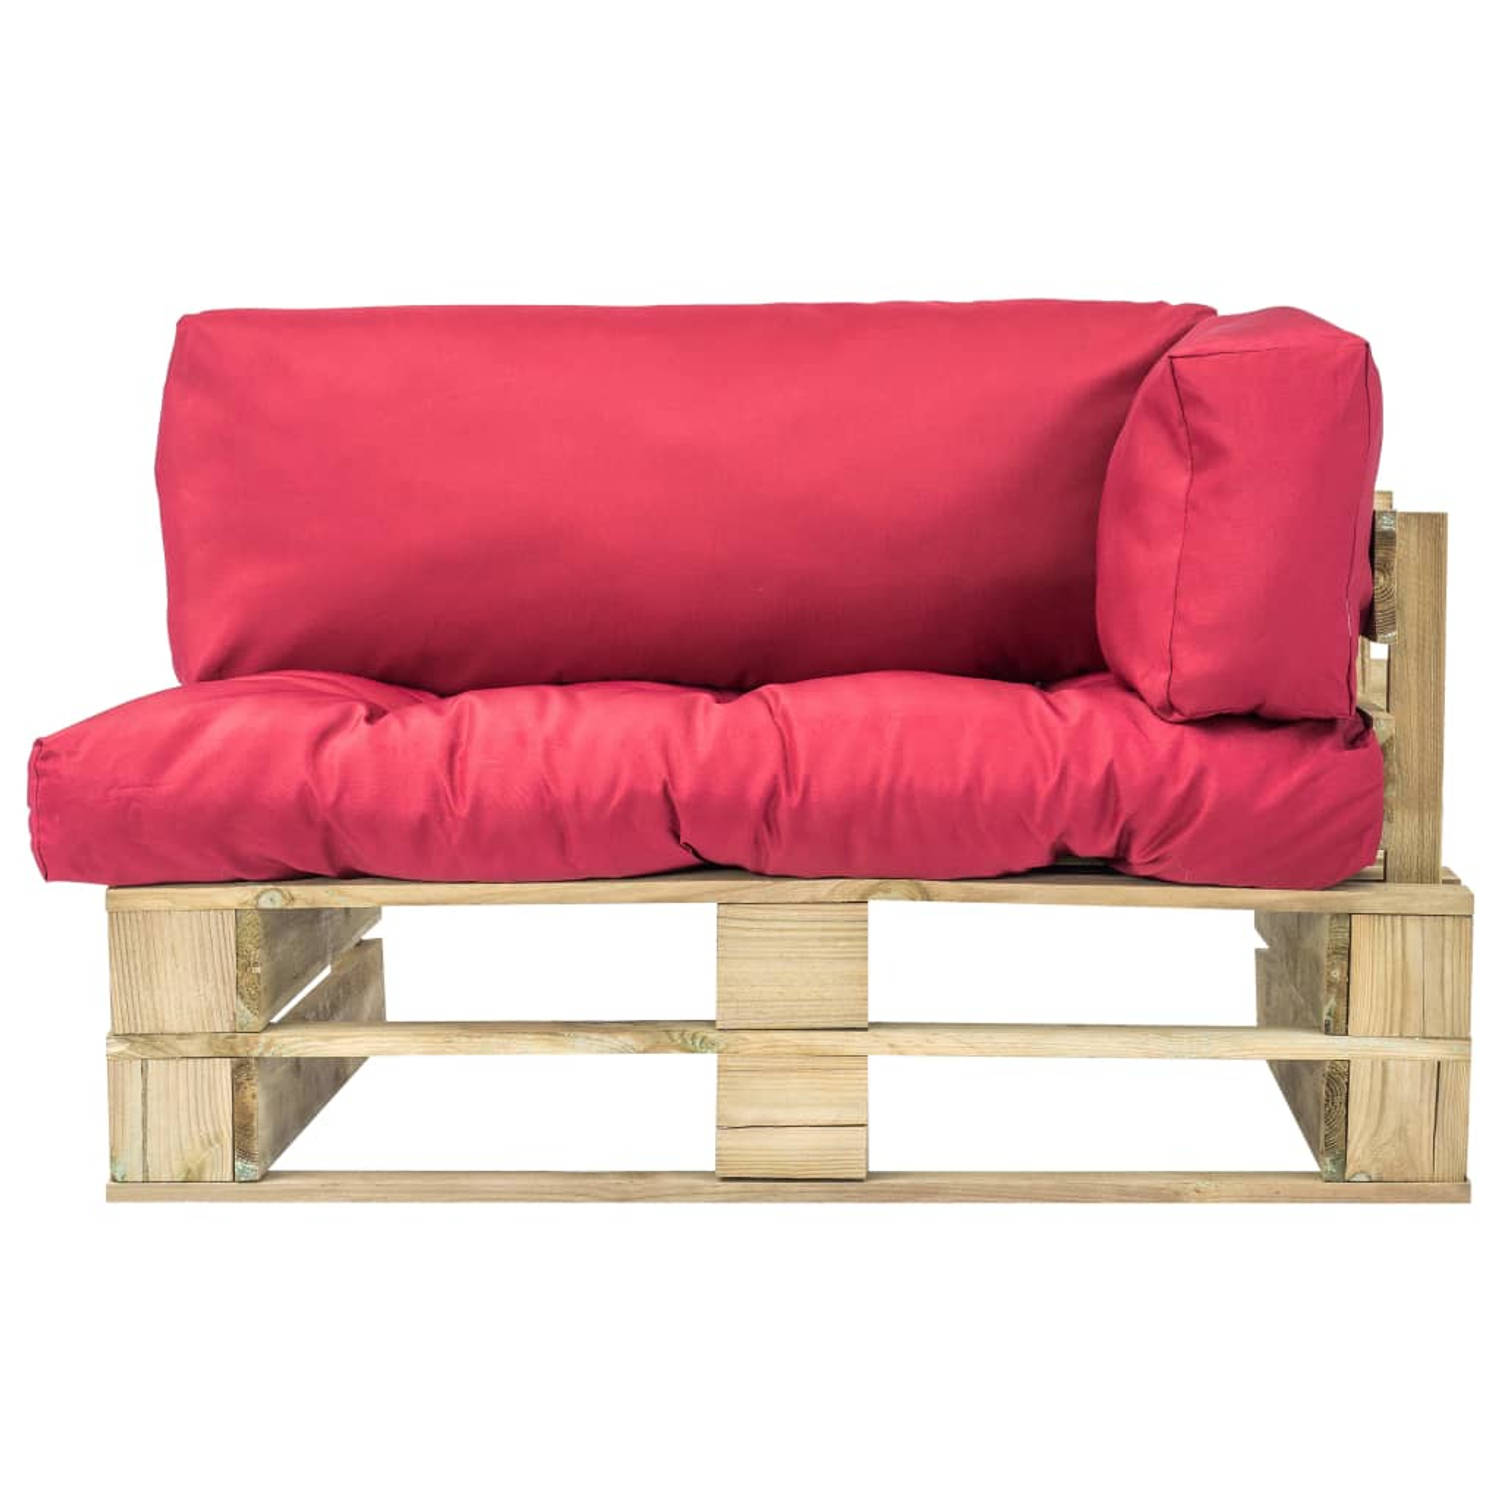 The Living Store Pallet Tuinbank - 110 x 66 x 65 cm - Grenenhout - Rood - Polyester